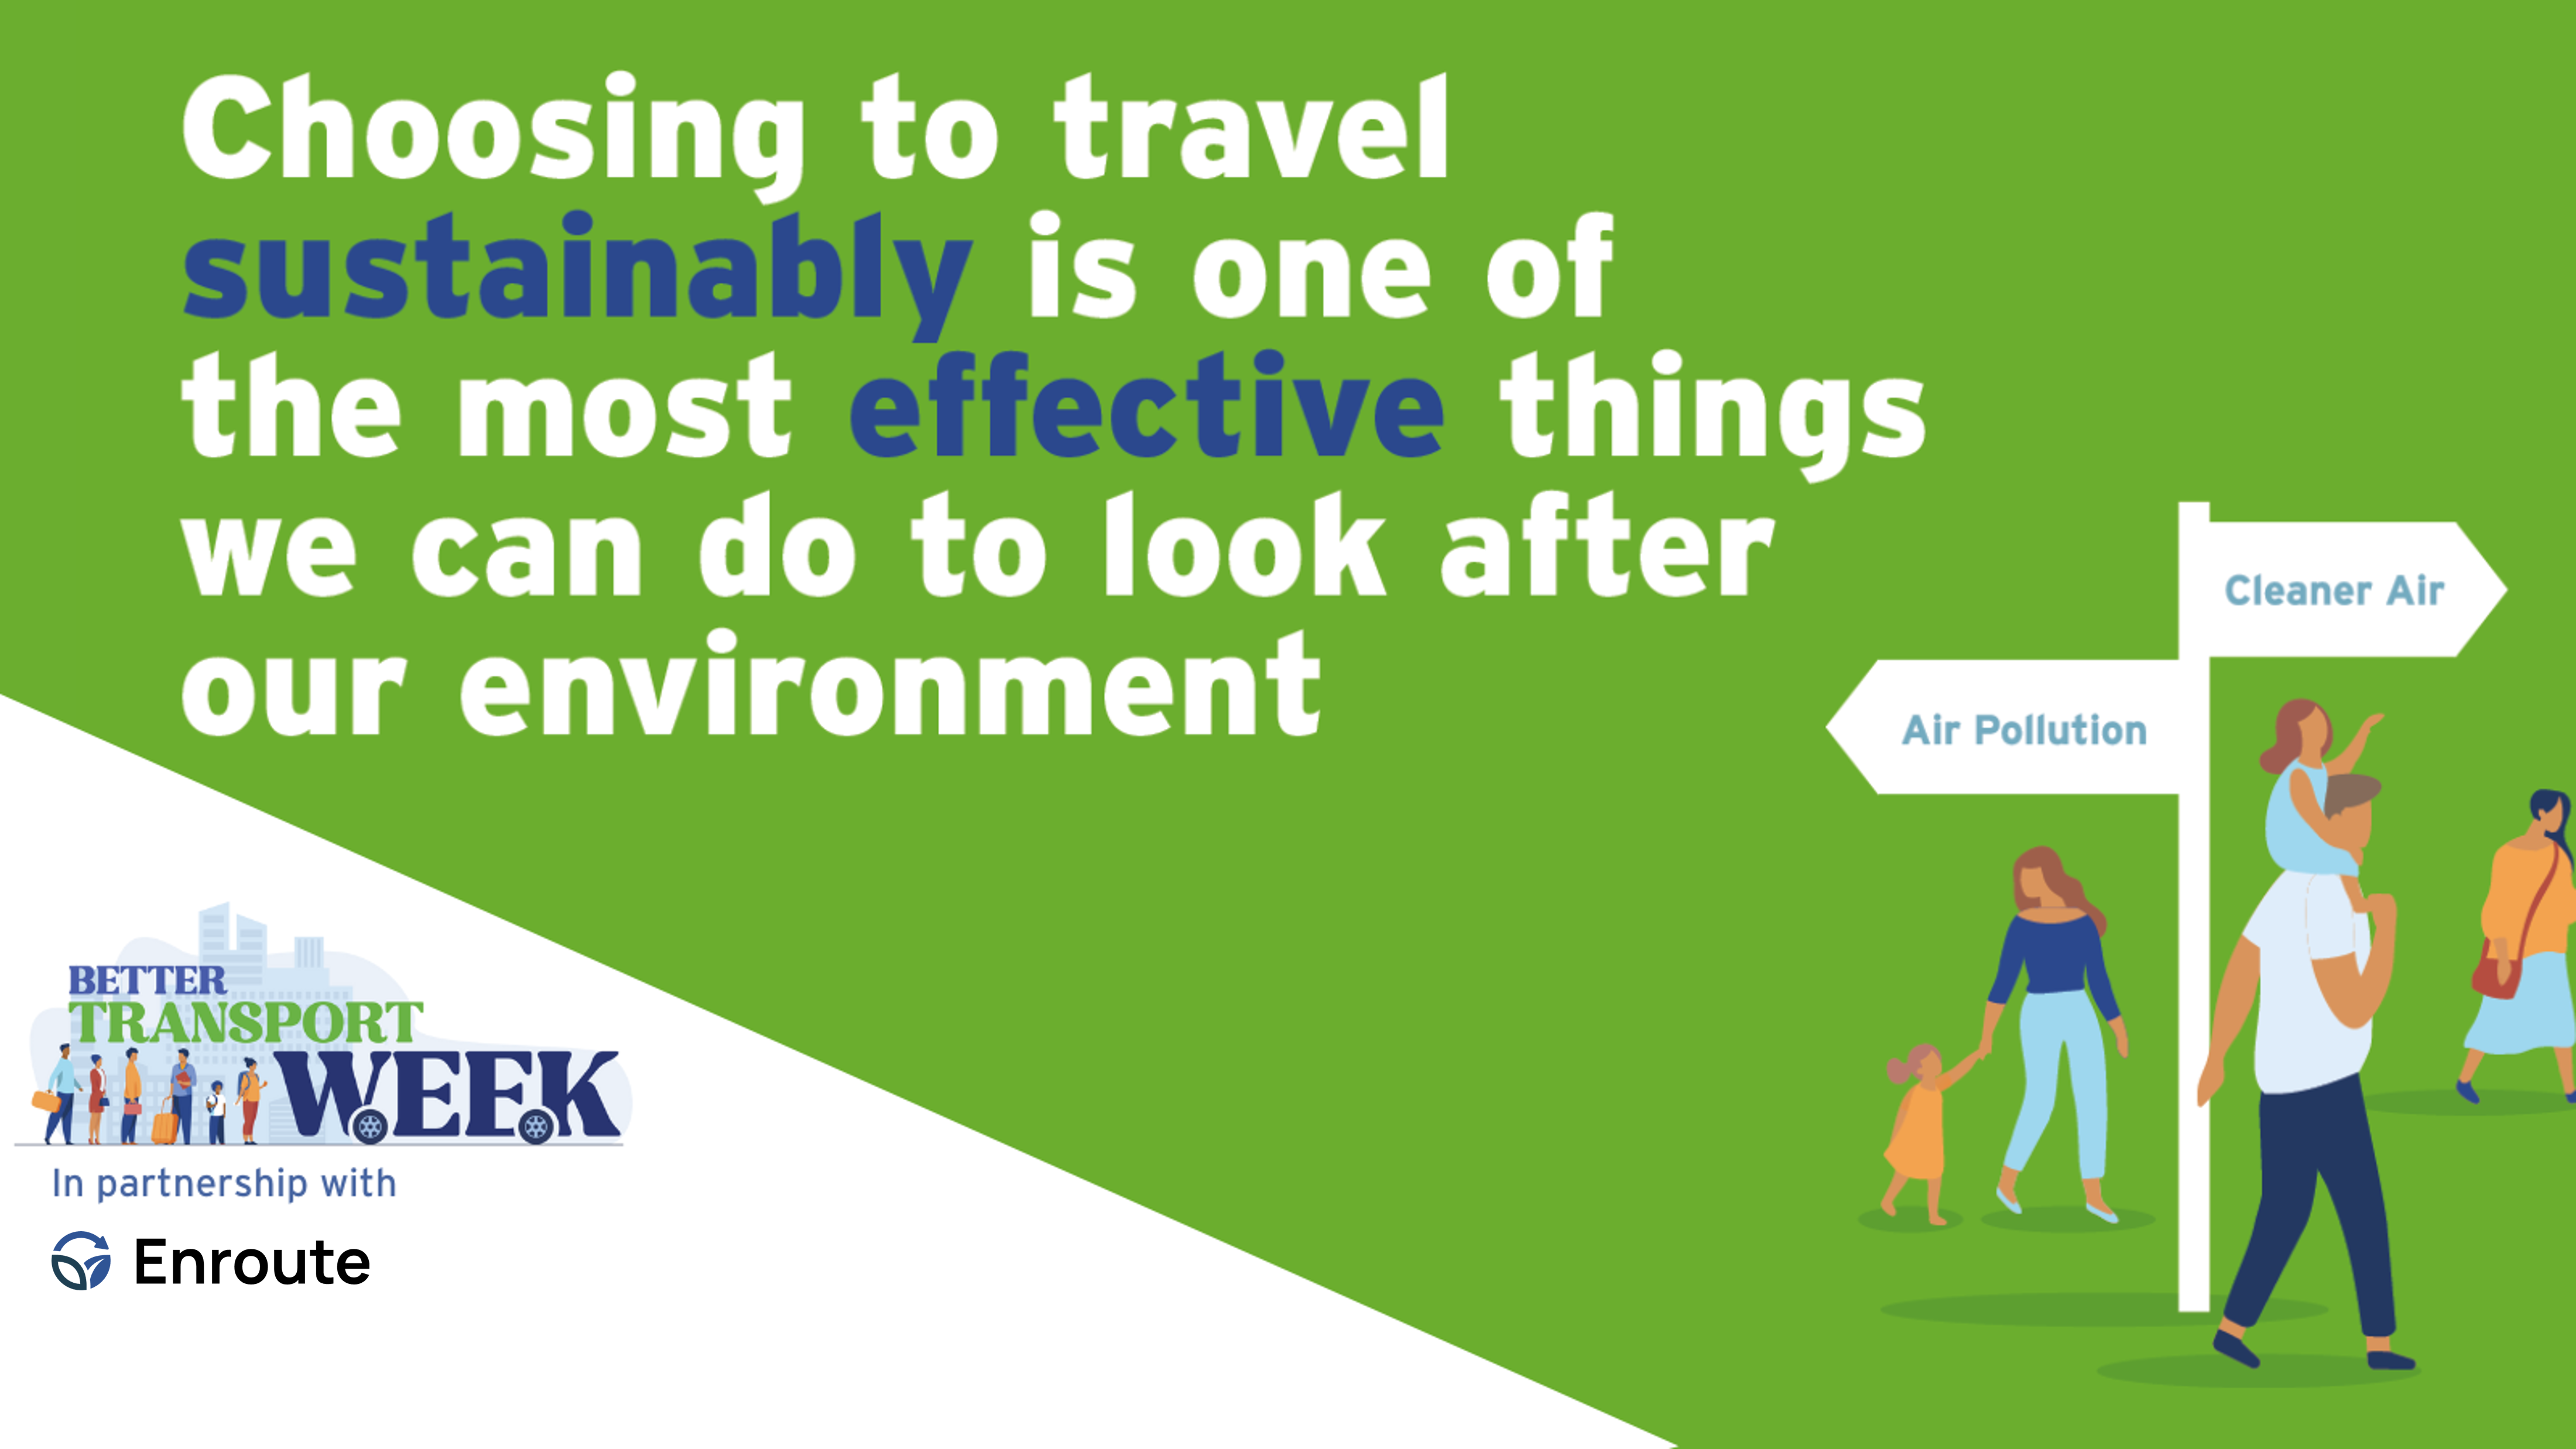 Celebrating Better Transport Week by embracing sustainability in transport